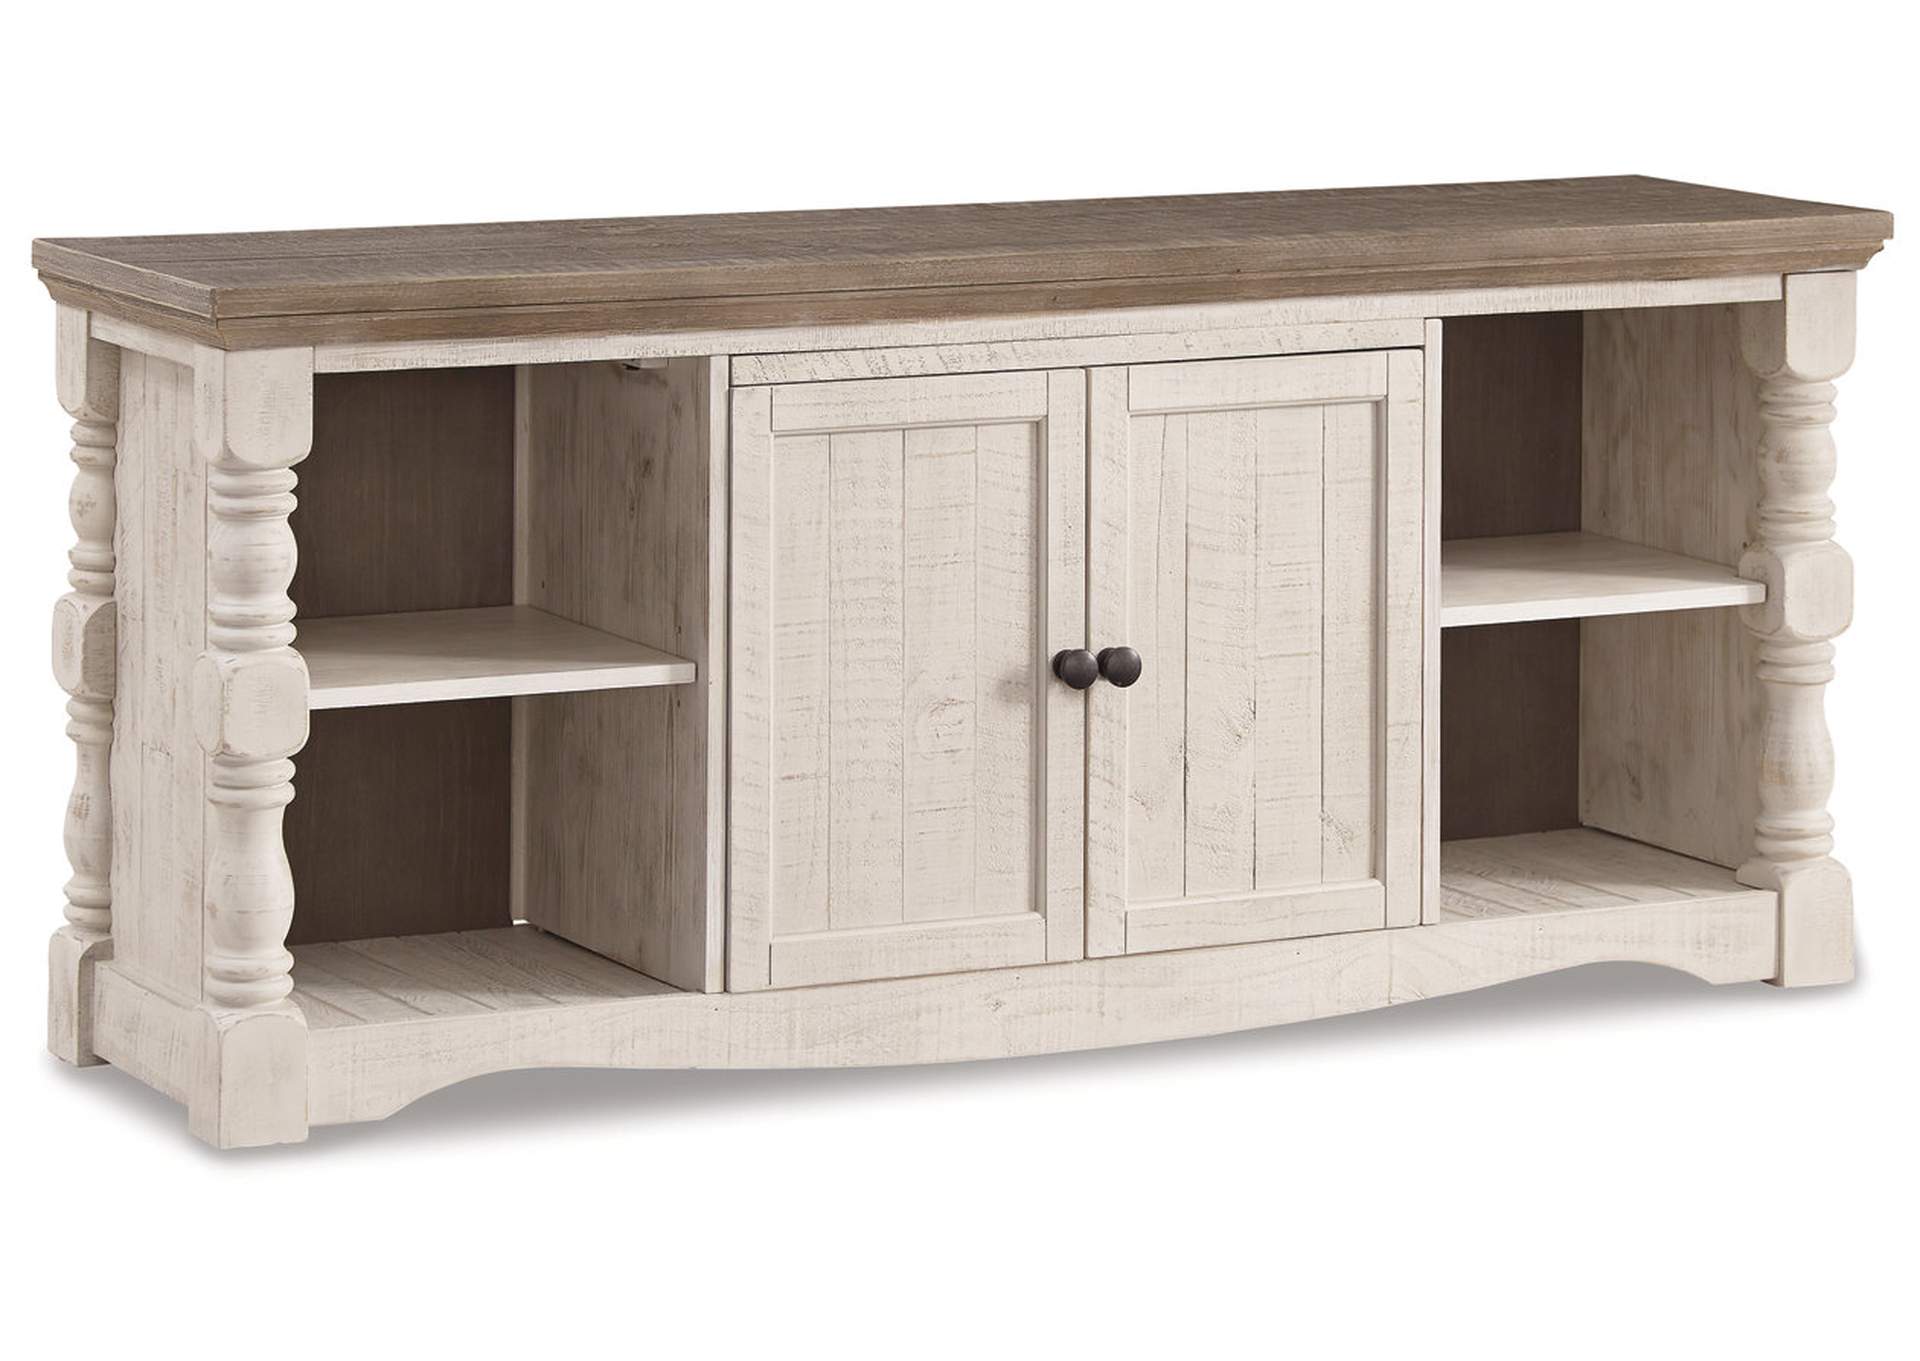 Havalance 67" TV Stand,Signature Design By Ashley